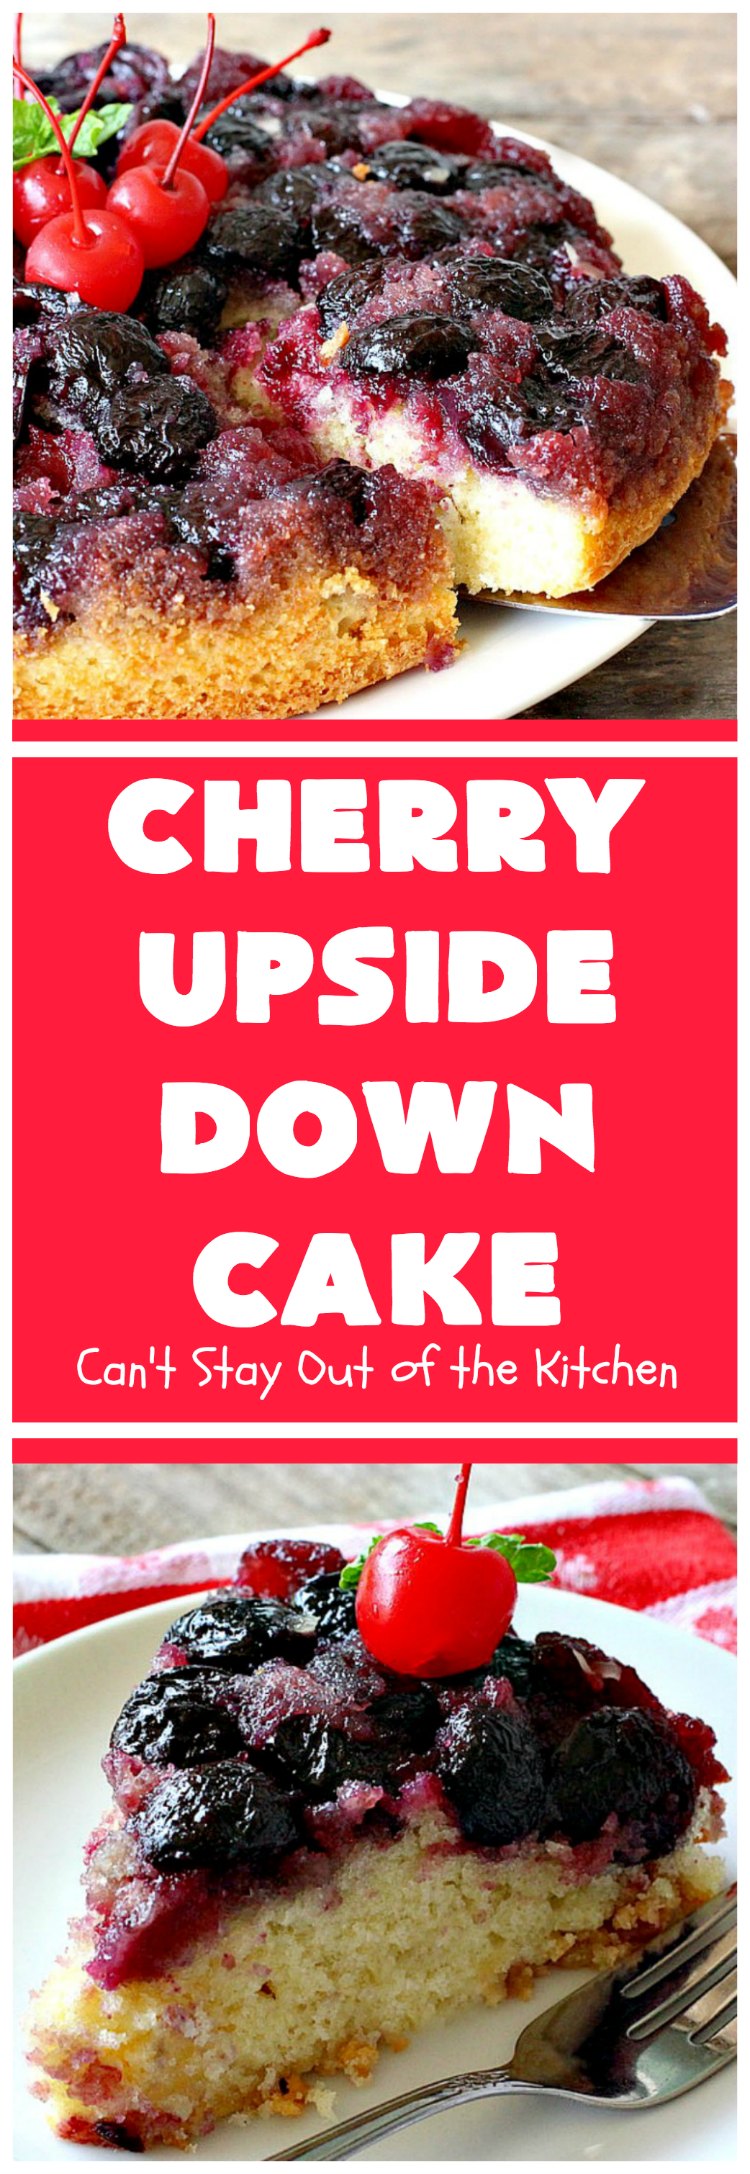 Cherry Upside Down Cake | Can't Stay Out of the Kitchen